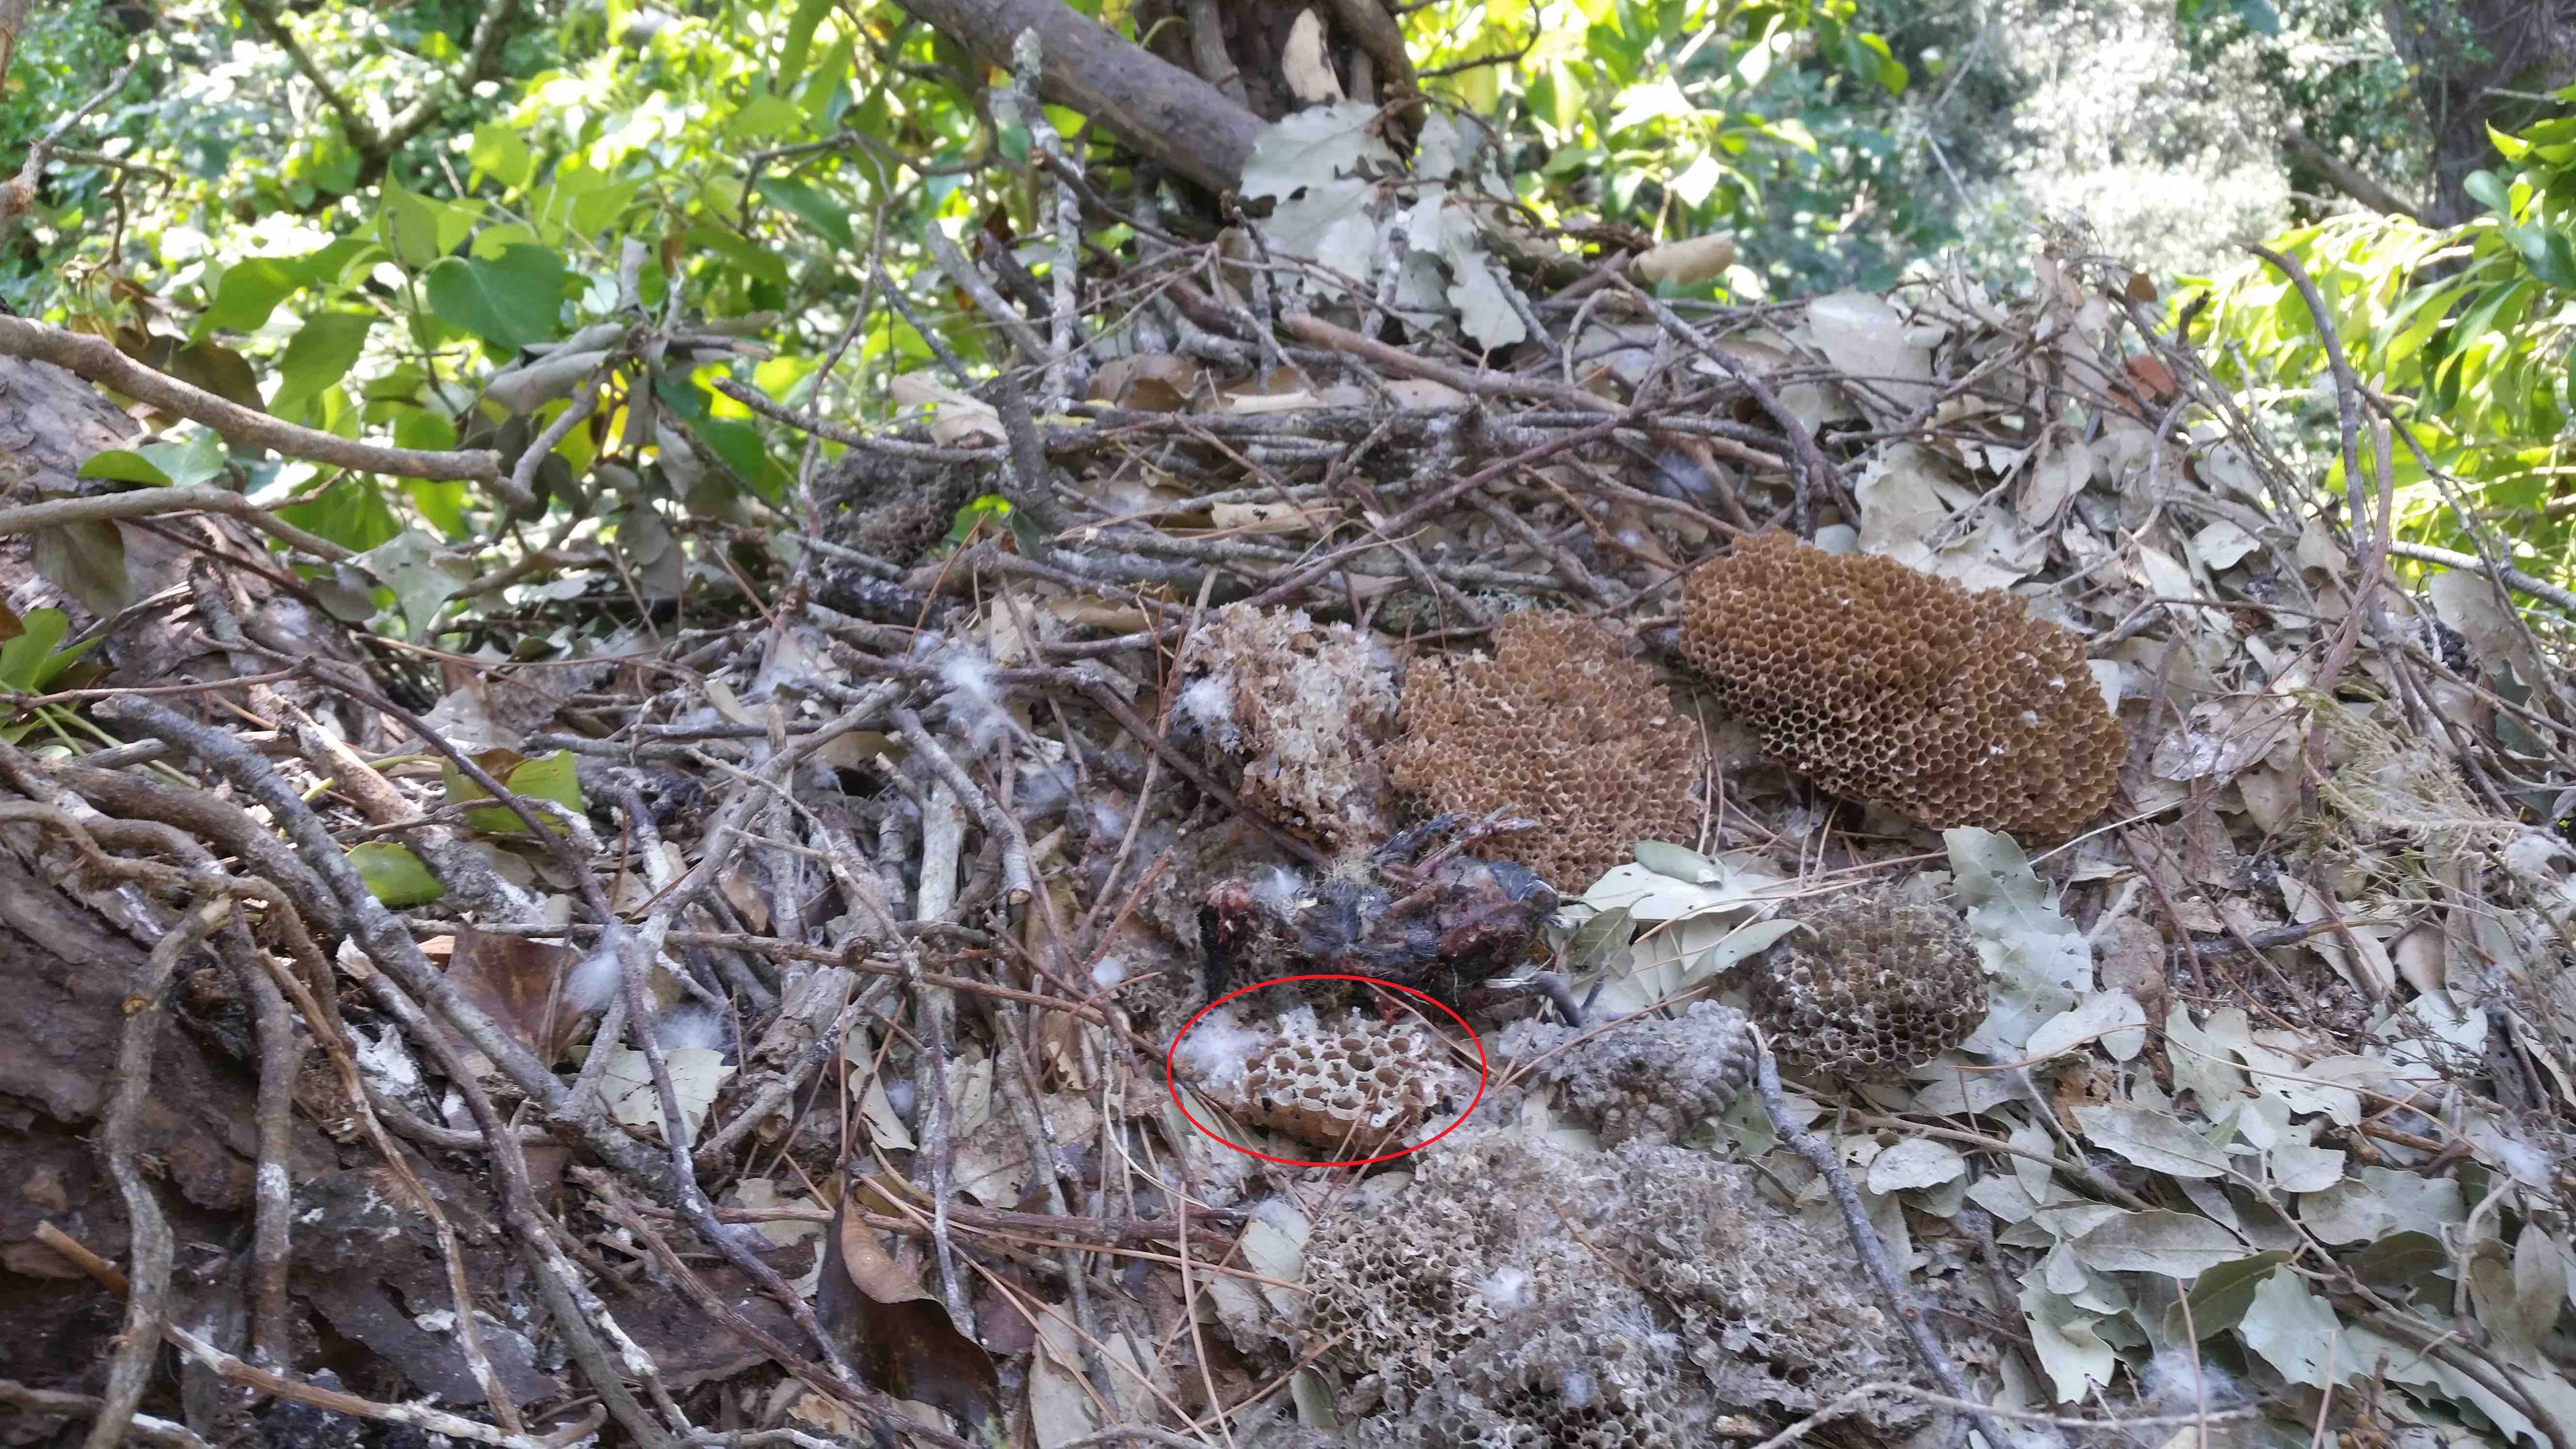 Image of the interior of a European Honey Buzzard nest, where a fragment of Asian Hornet nest is found. Credit: J. Grajera.